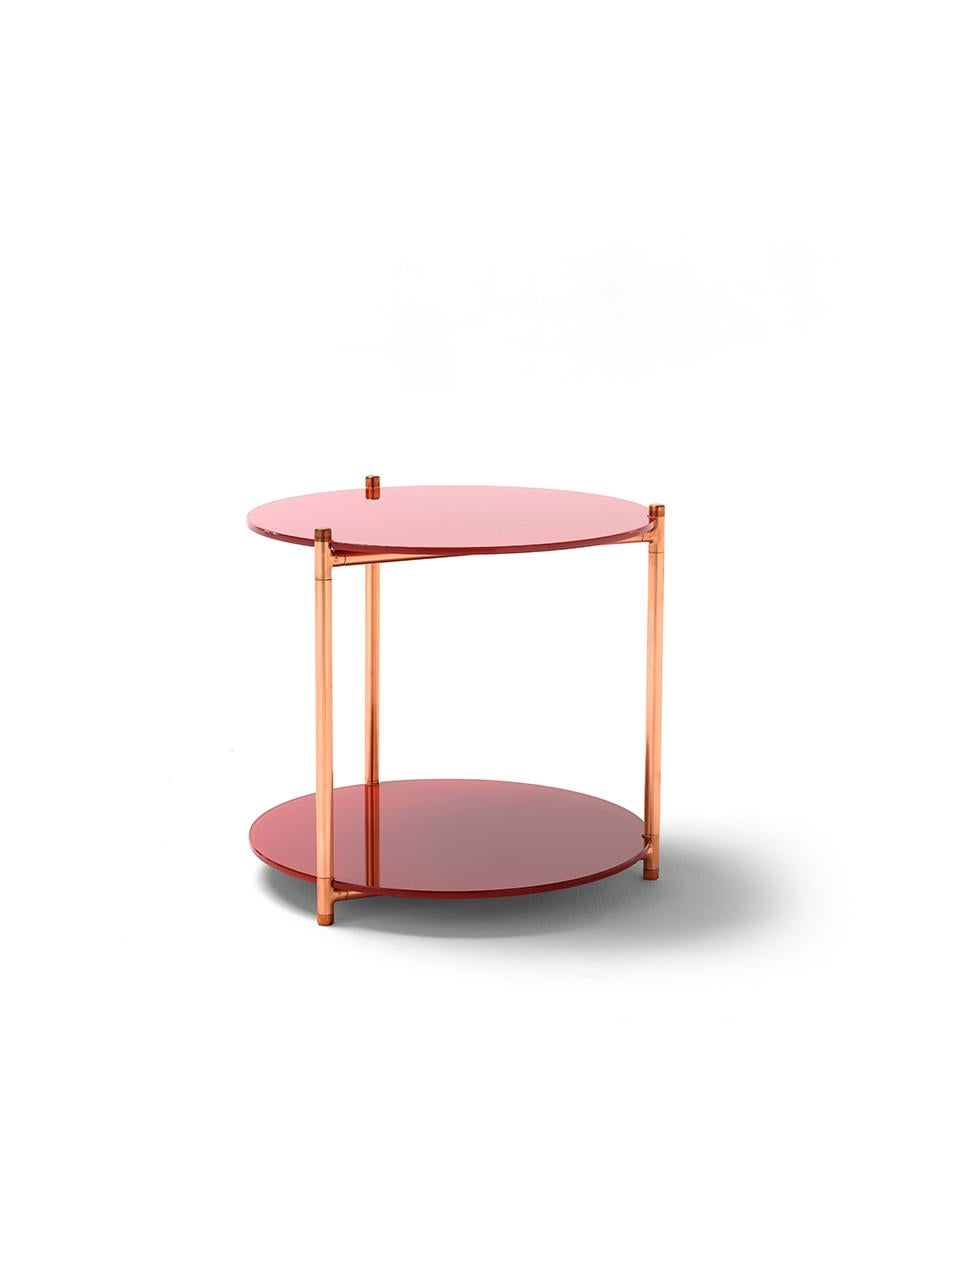 The Long Playing side tables stem from the eponymous étagère and feature the same play of materials: an essential but rich copper structure supporting two circular shelves made of back-painted glass. The rich warm metal of the base plays beautifully